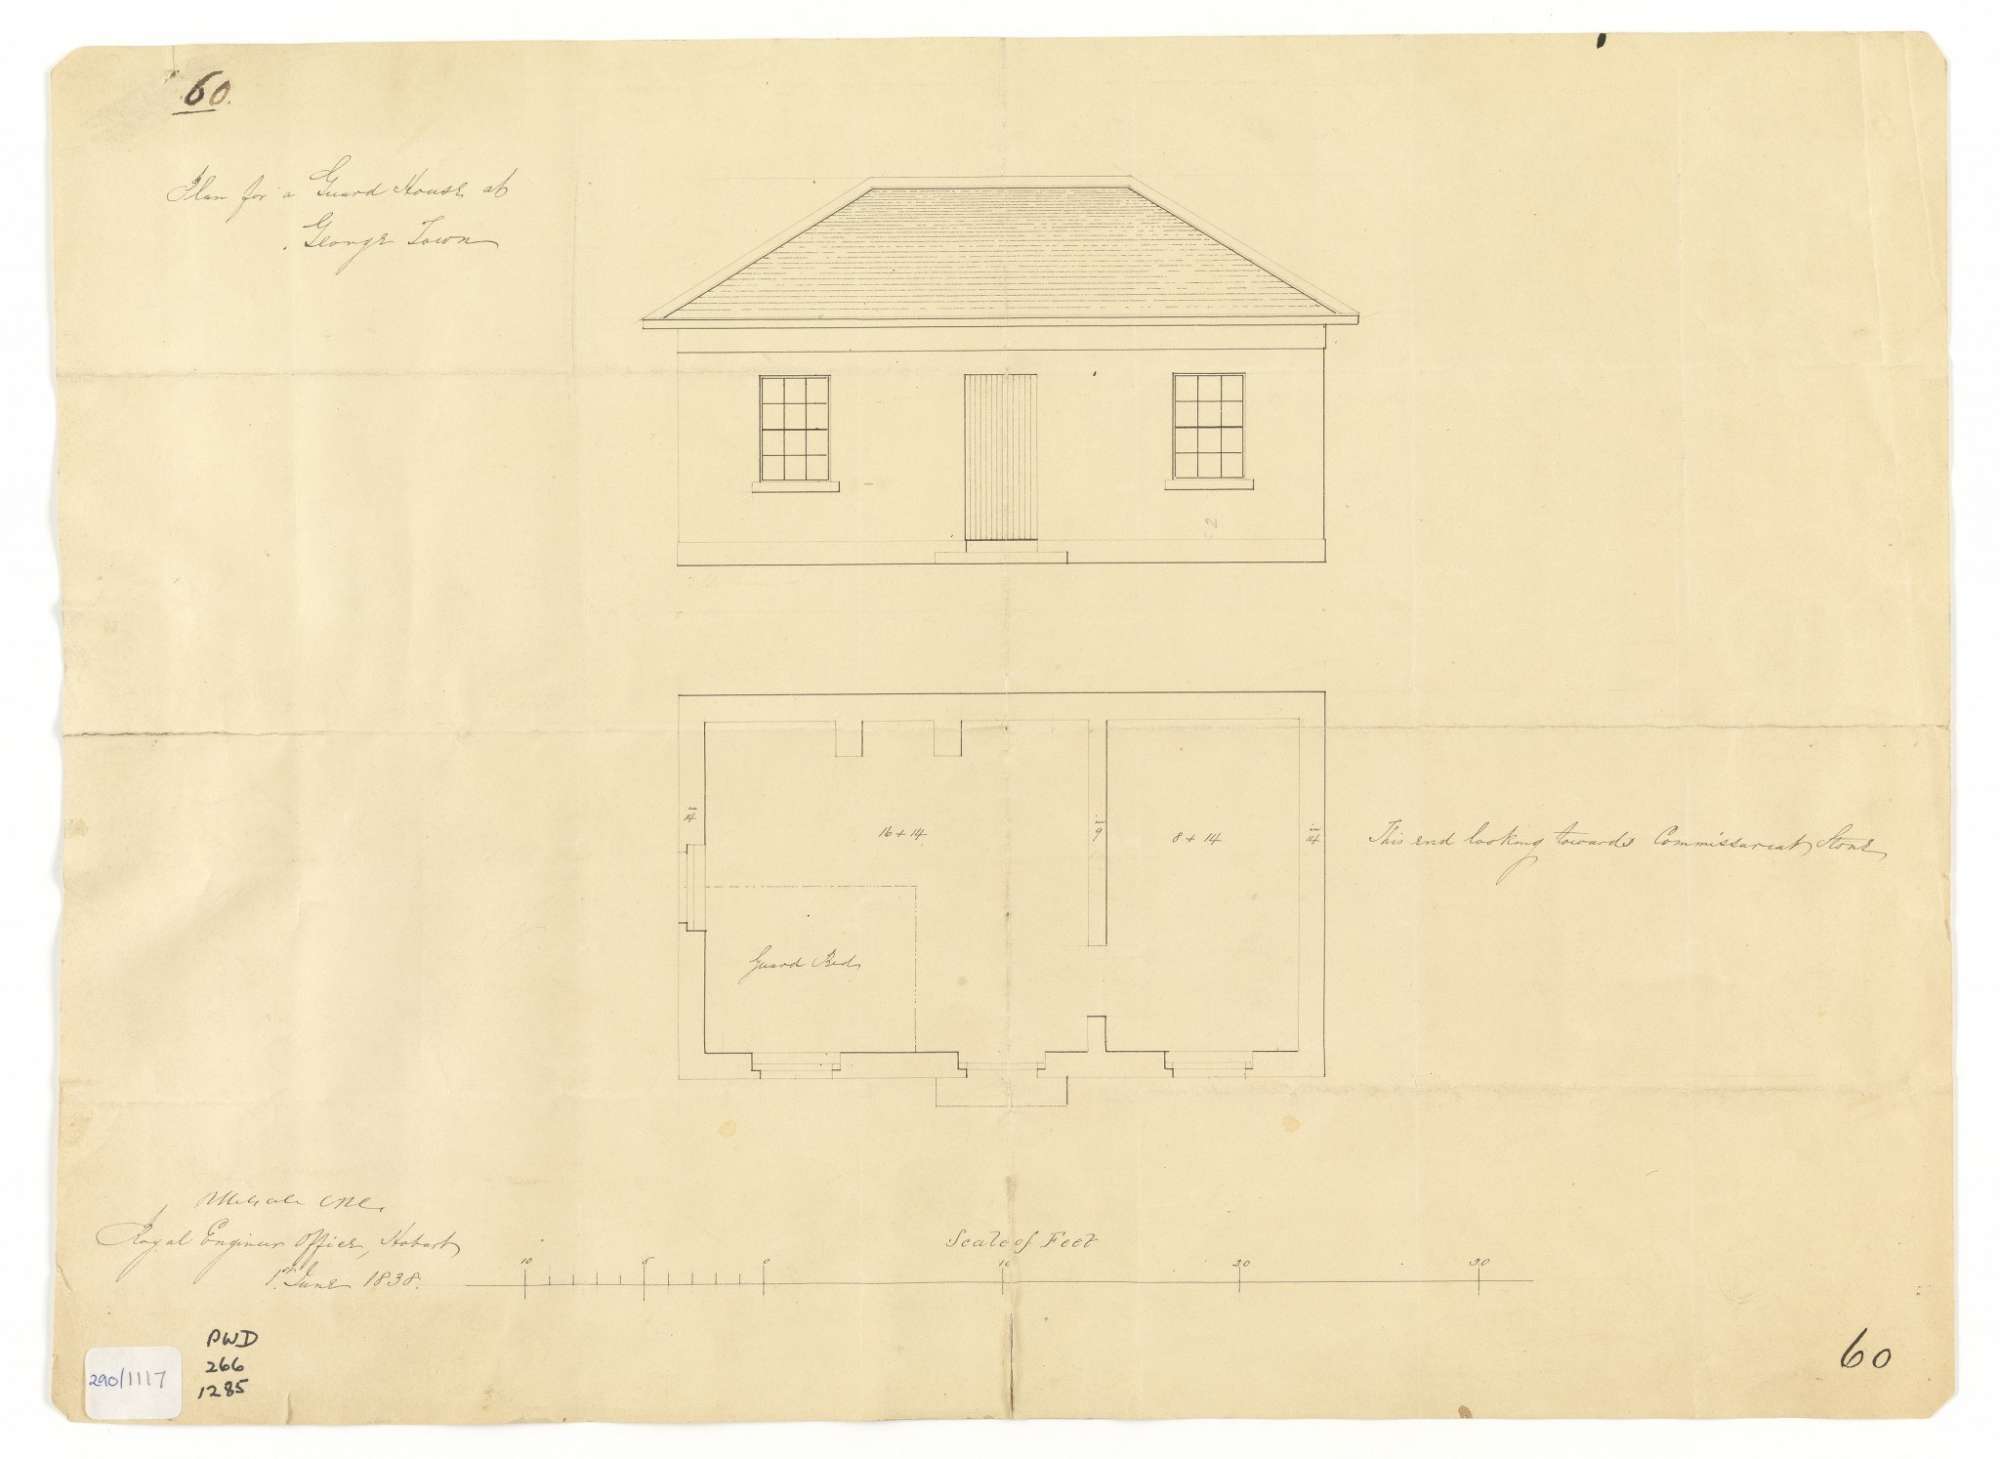 The Watch House drawing